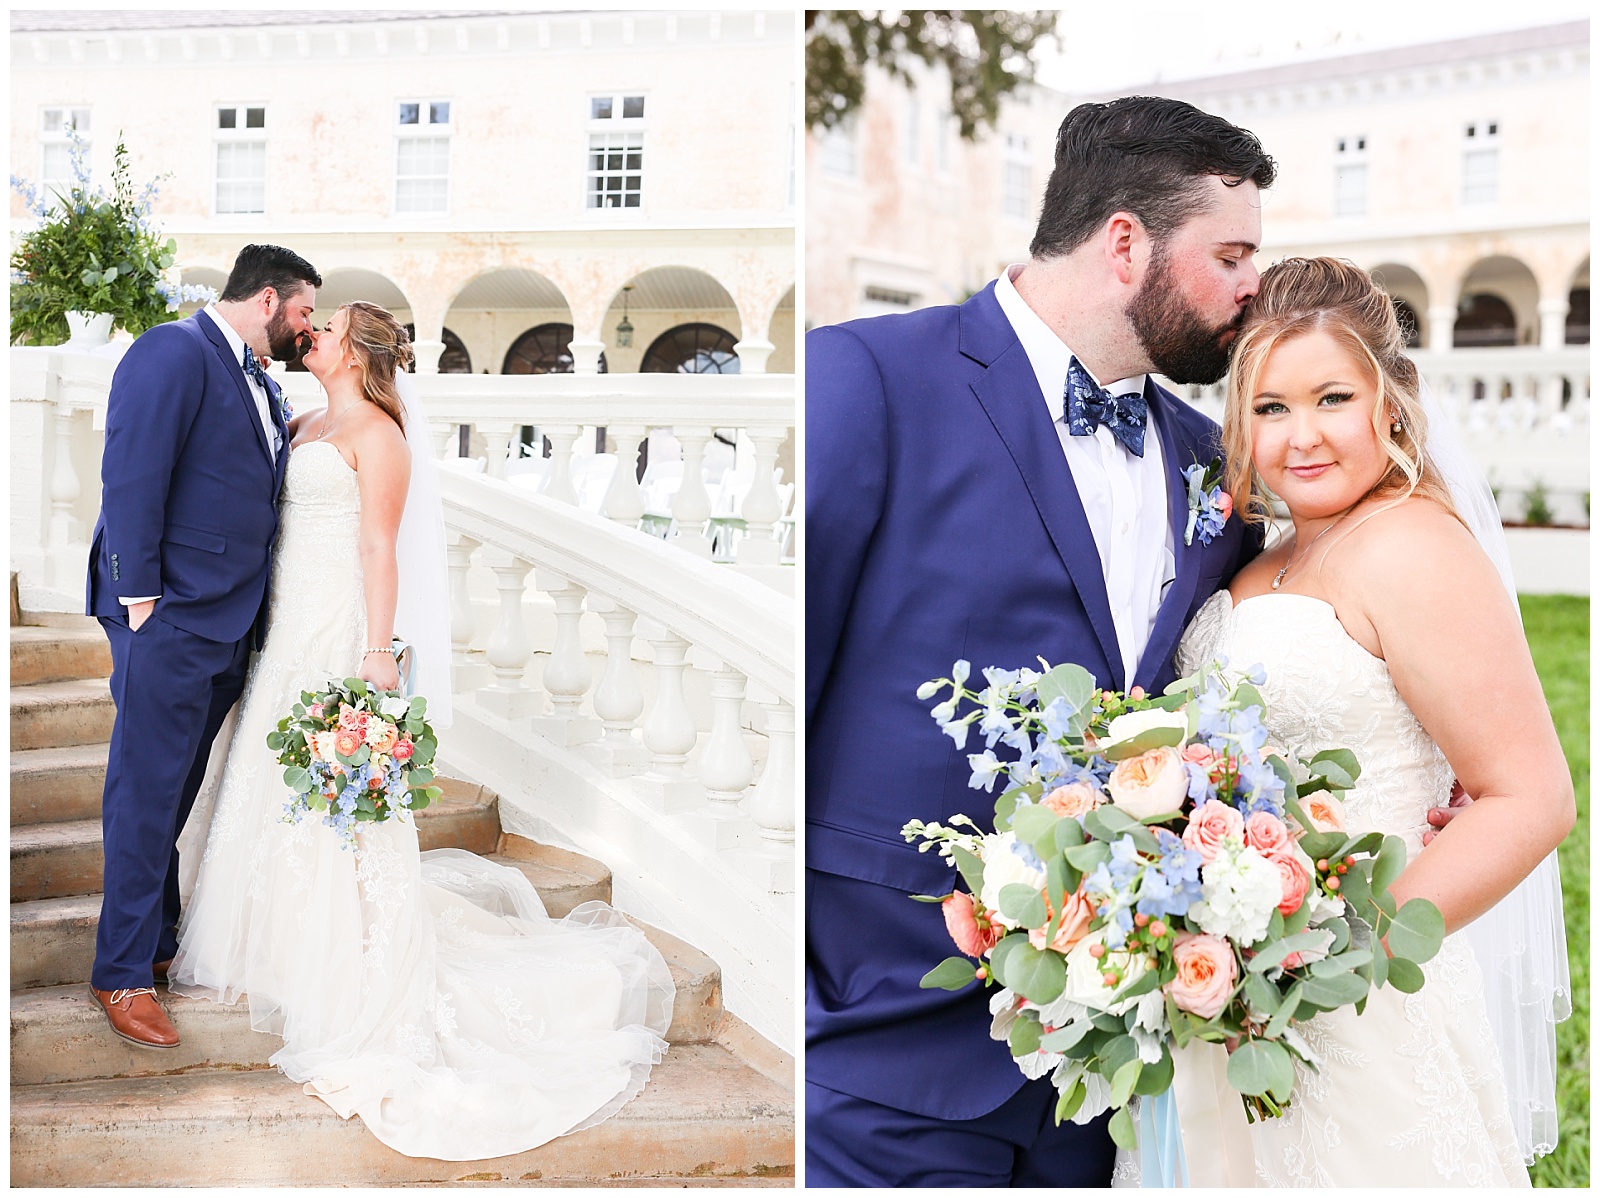 photo on left of bride and groom on staircase in front of venue, photo on right of groom kissing the bride on the head and bride looking ant the camera holding her bouquet